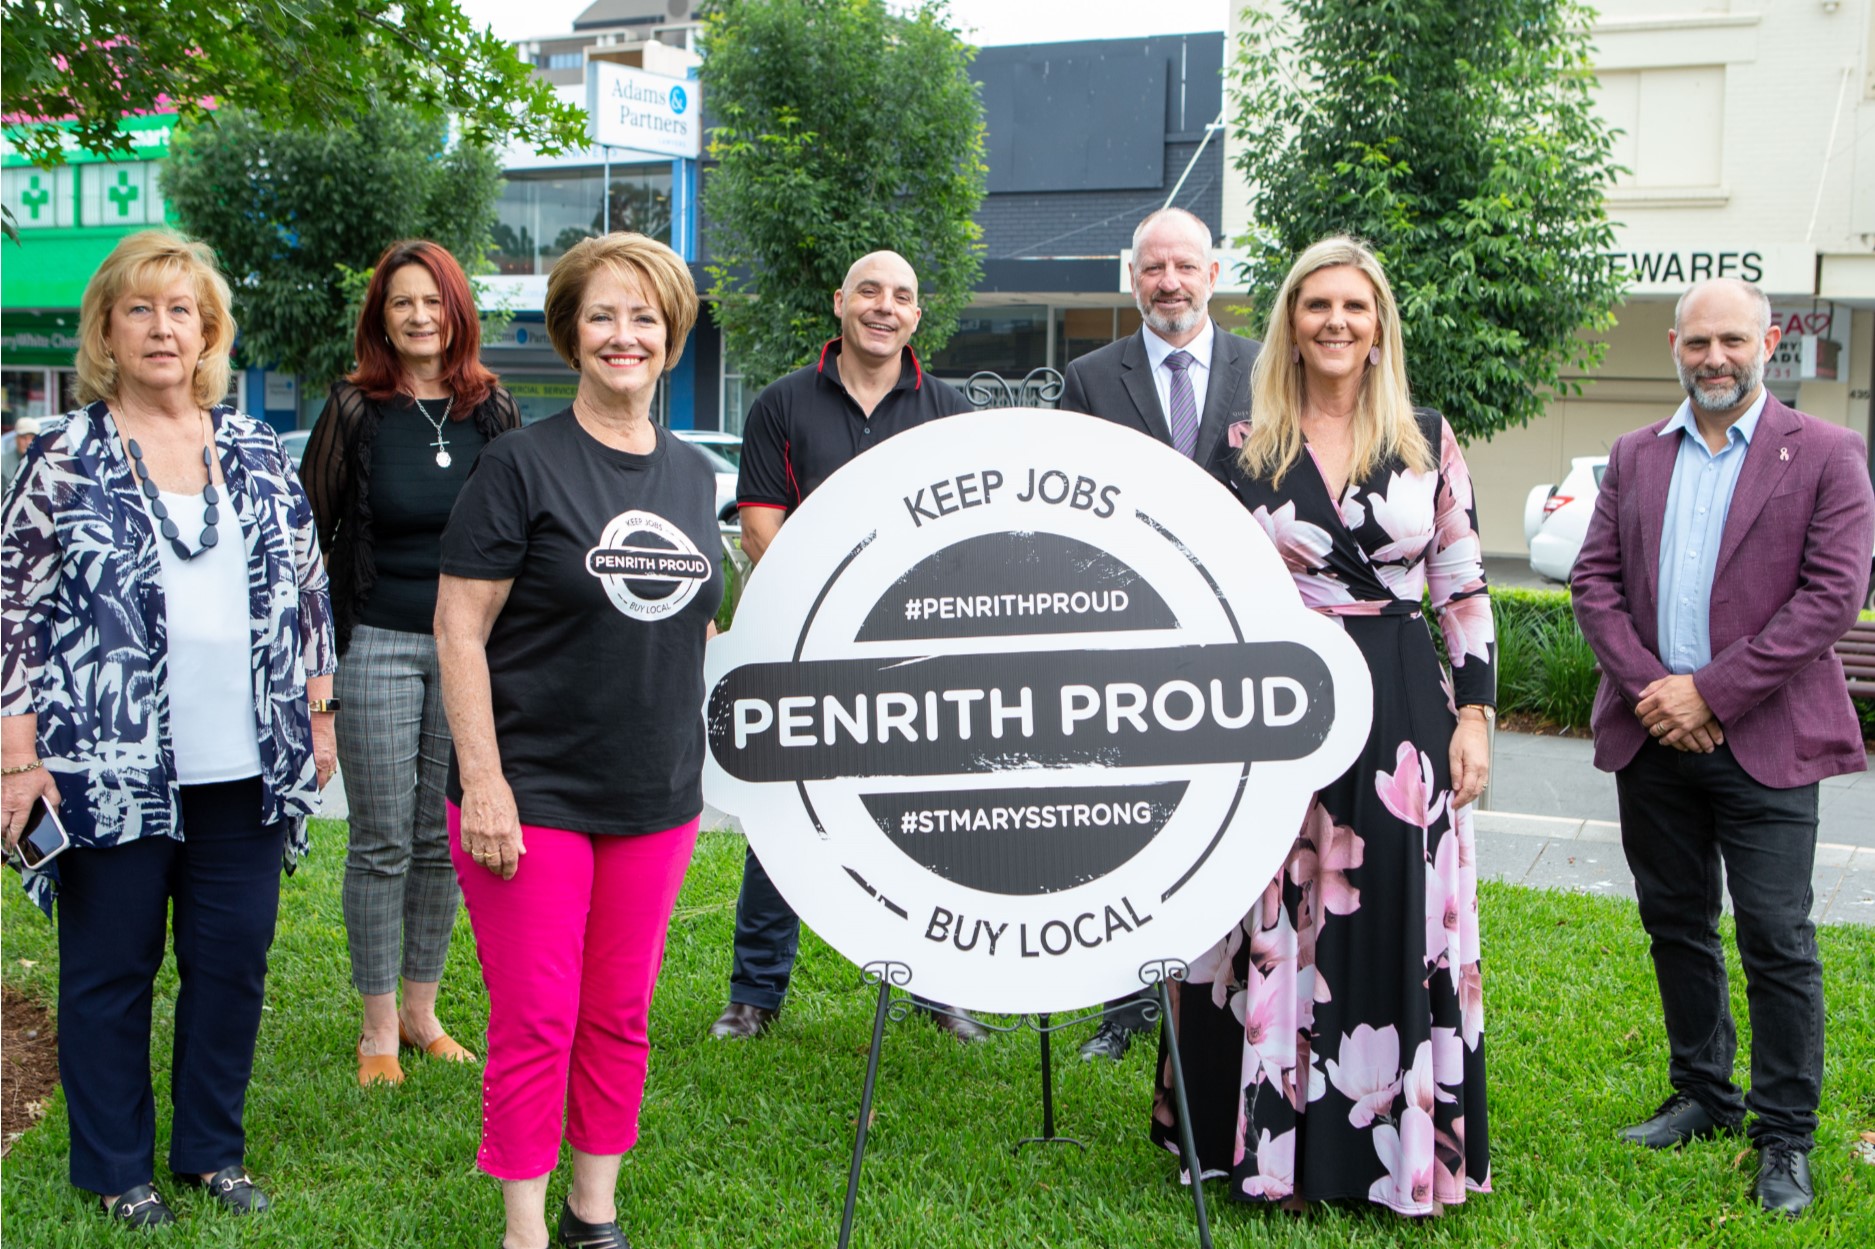 group of people standing near sign that says Penrith Proud